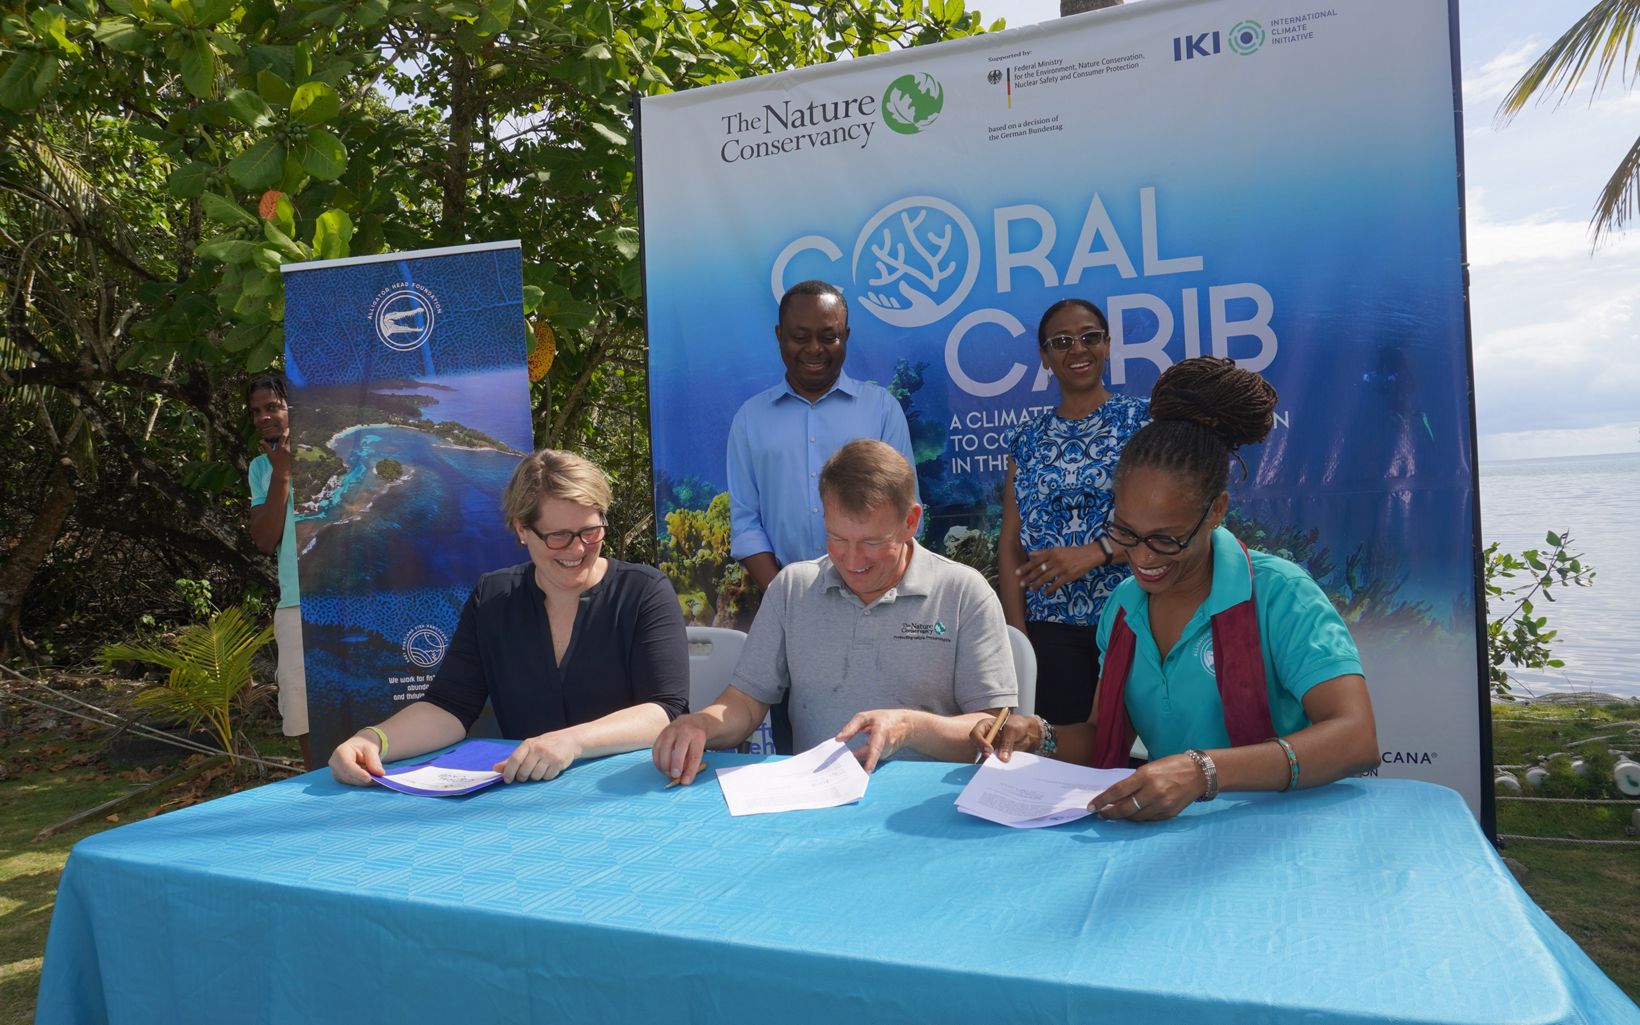 Signing CoralCarib Project Representatives from TNC and Alligator Head sign cooperation agreement © Omar Davis